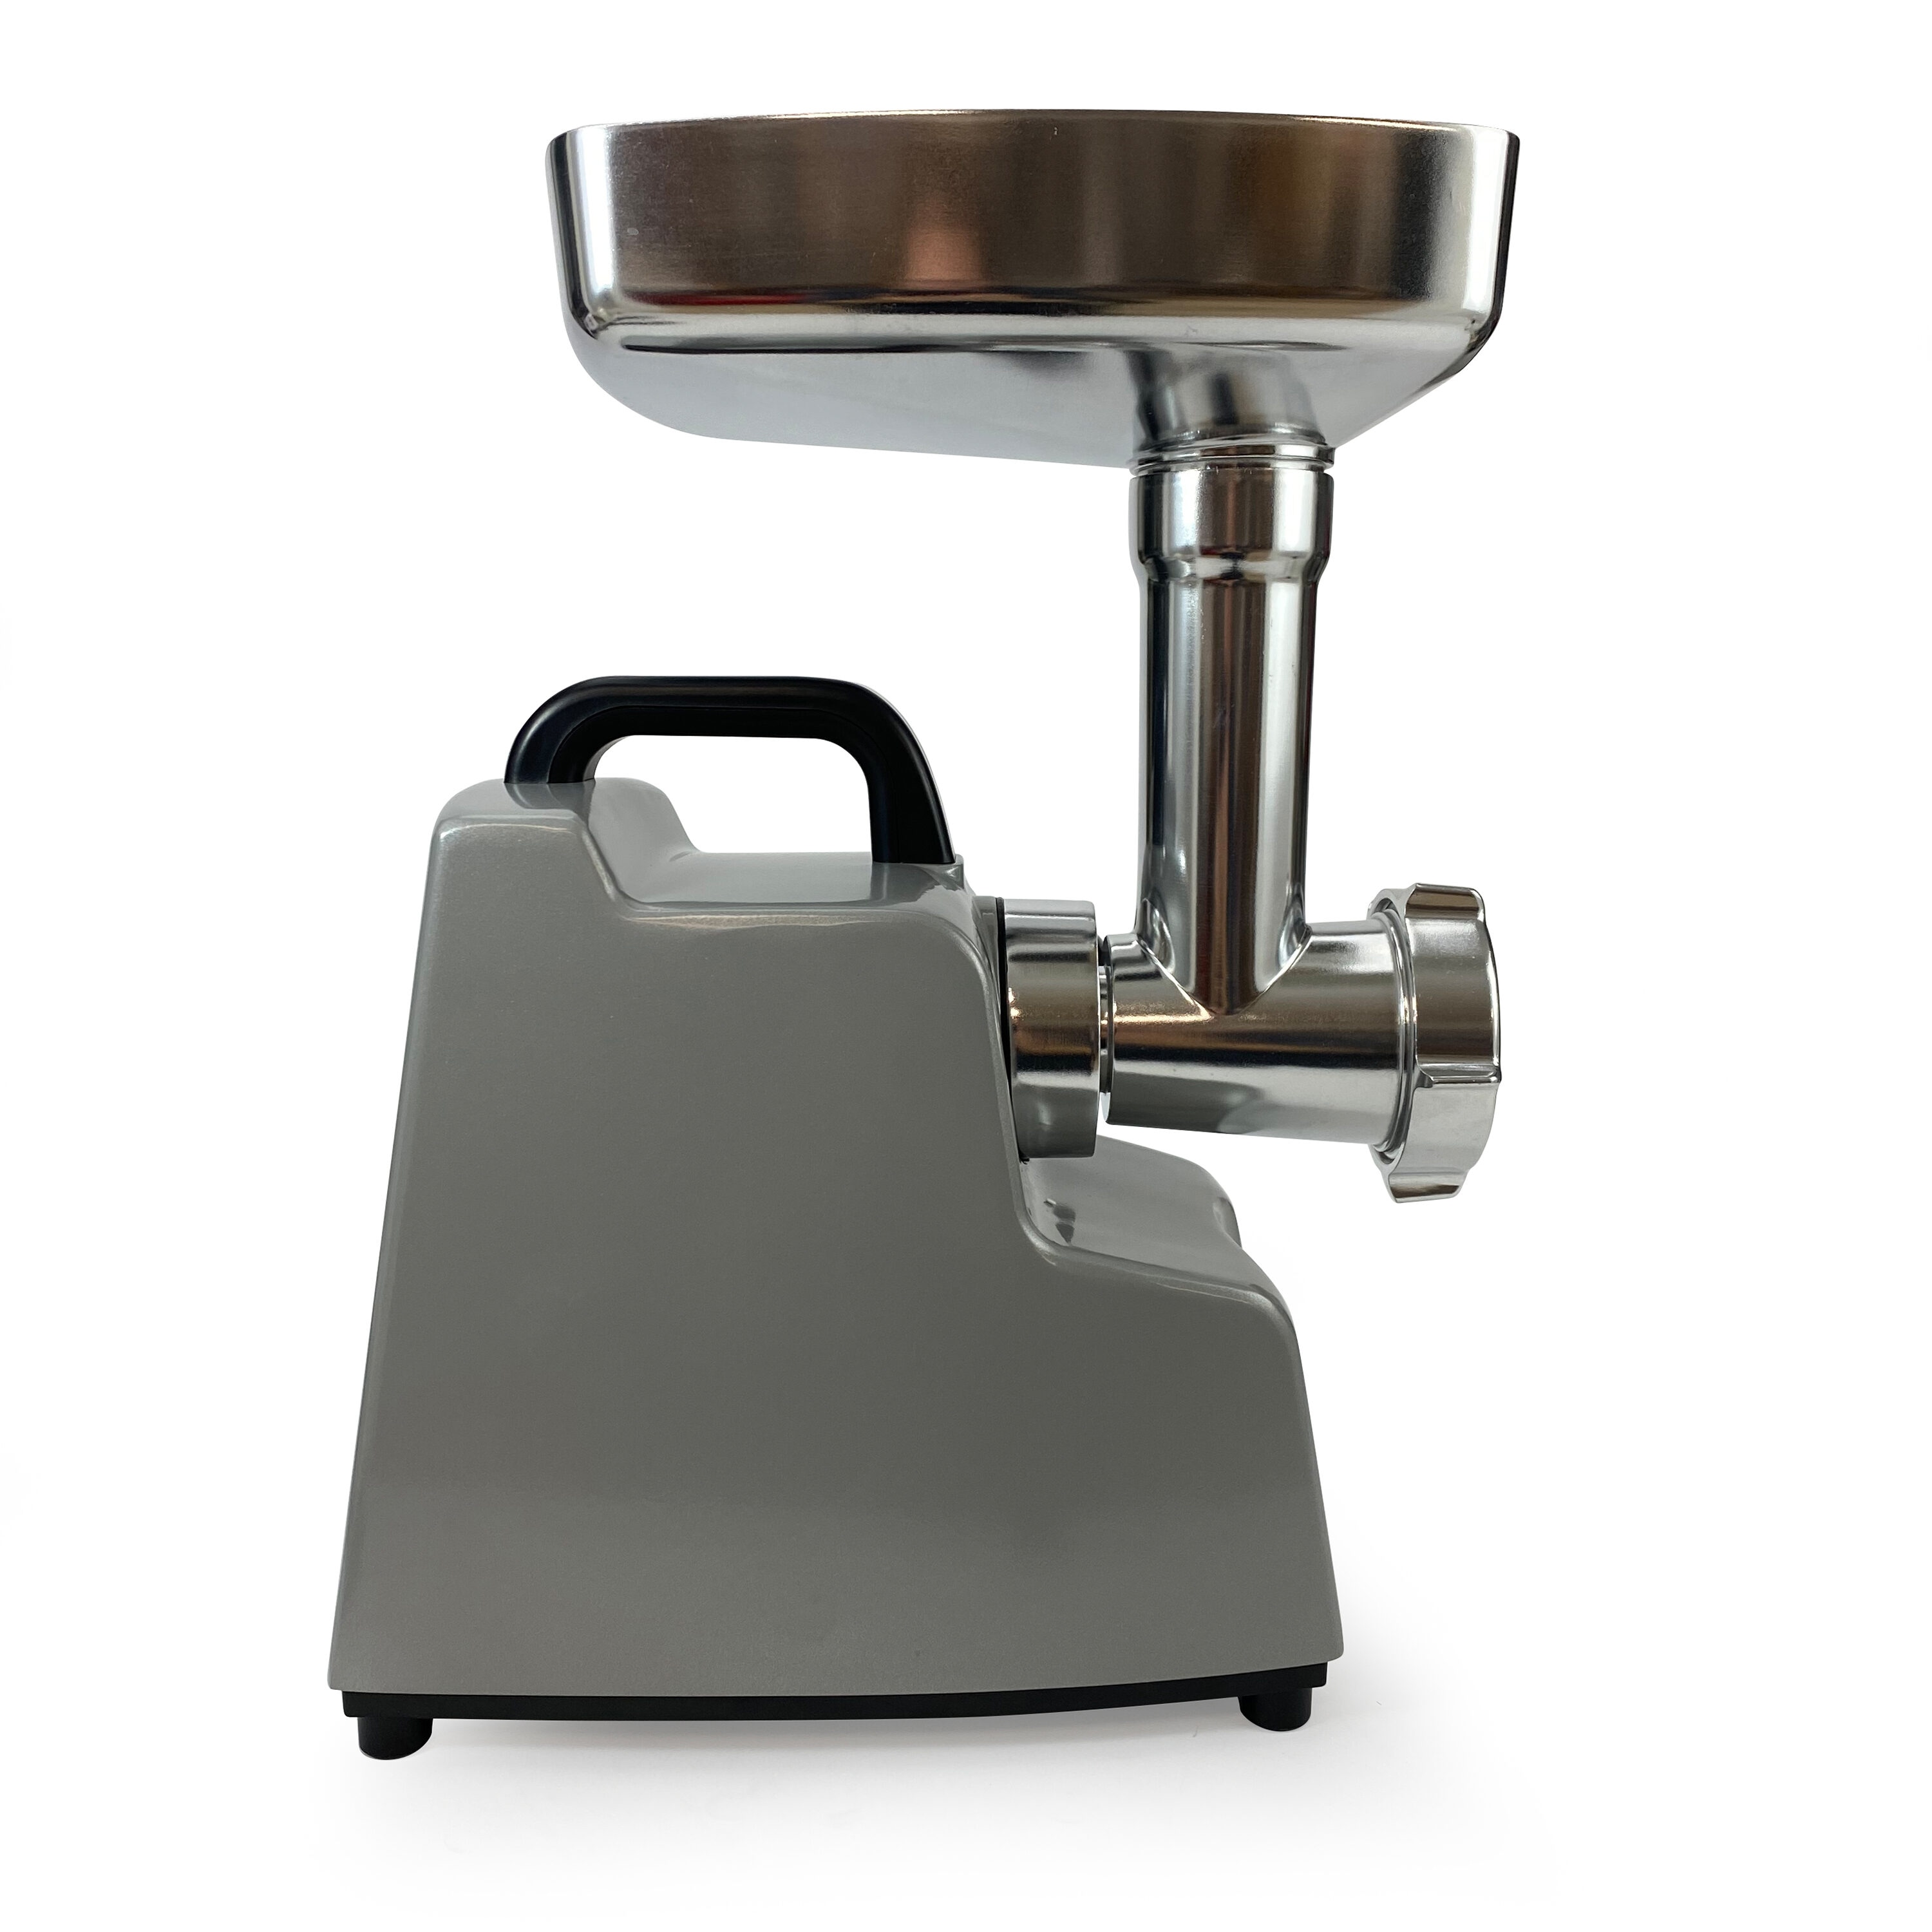 Easily and quickly grind meats, fruits, veggies and cheese with this  professional meat grinder. Sleek and efficient, this commercial quality,  cast metal food grinder will grind up to 3.5 pounds of meat